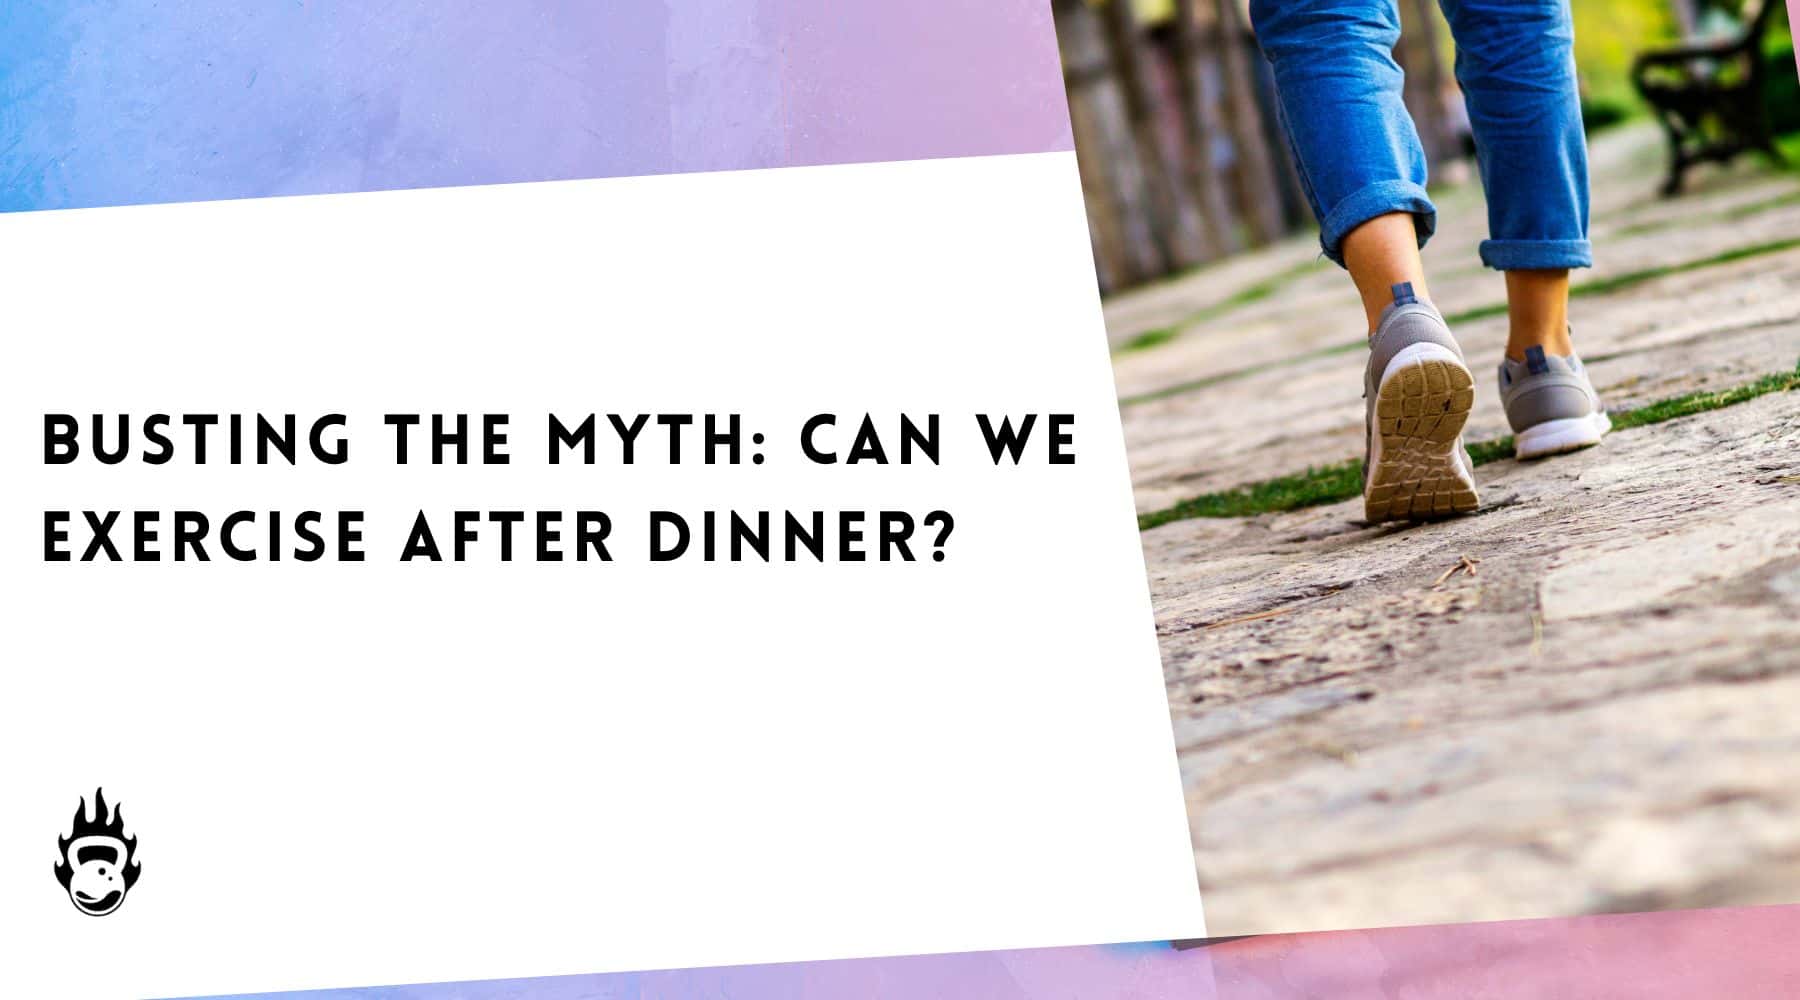 Busting the Myth: Can We Exercise After Dinner?